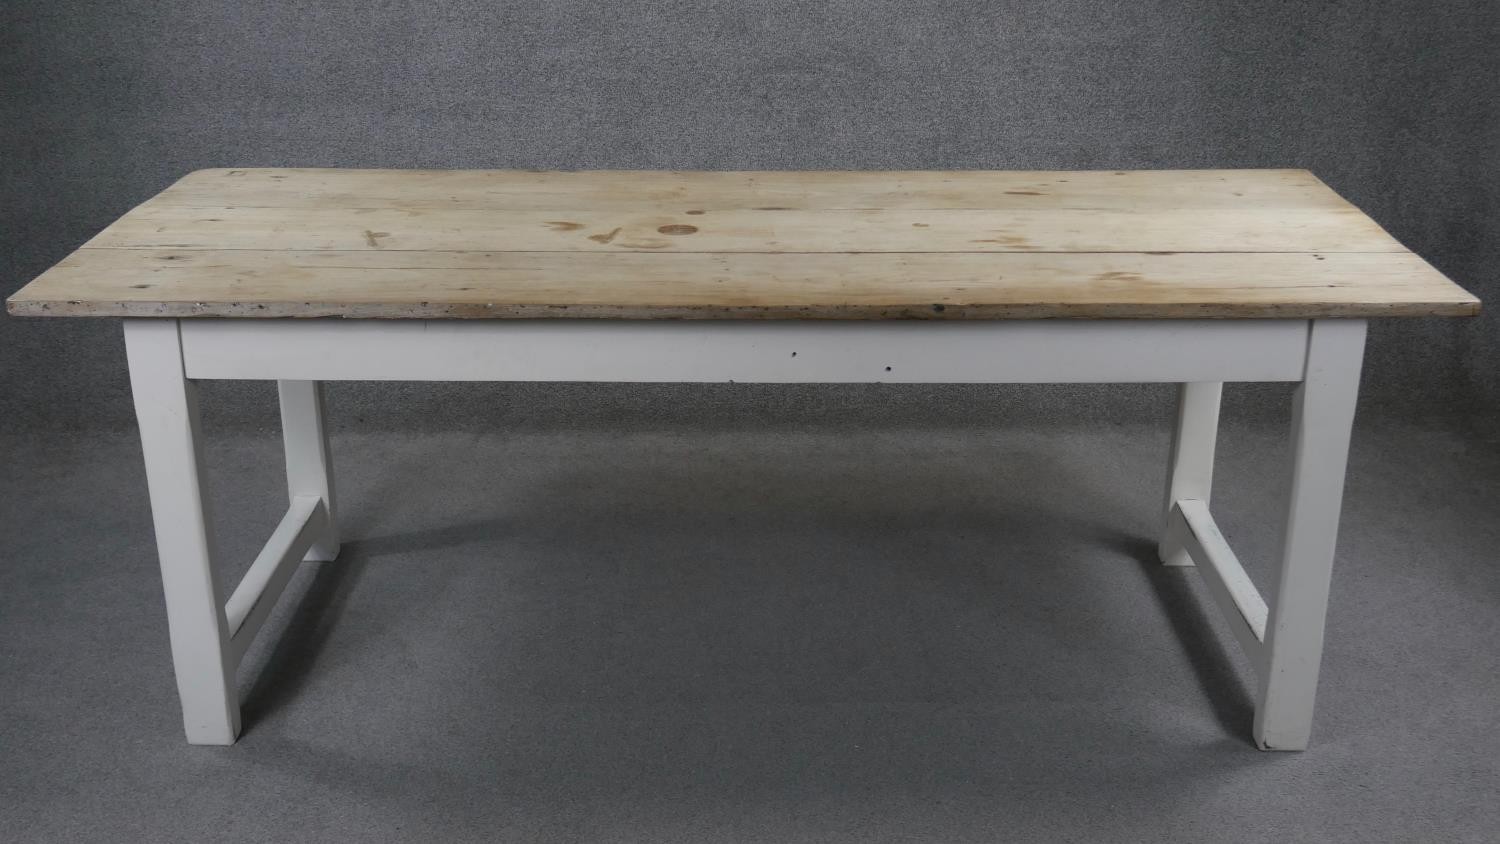 A 19th century refectory dining table with ash planked top on painted base with central frieze - Image 2 of 5